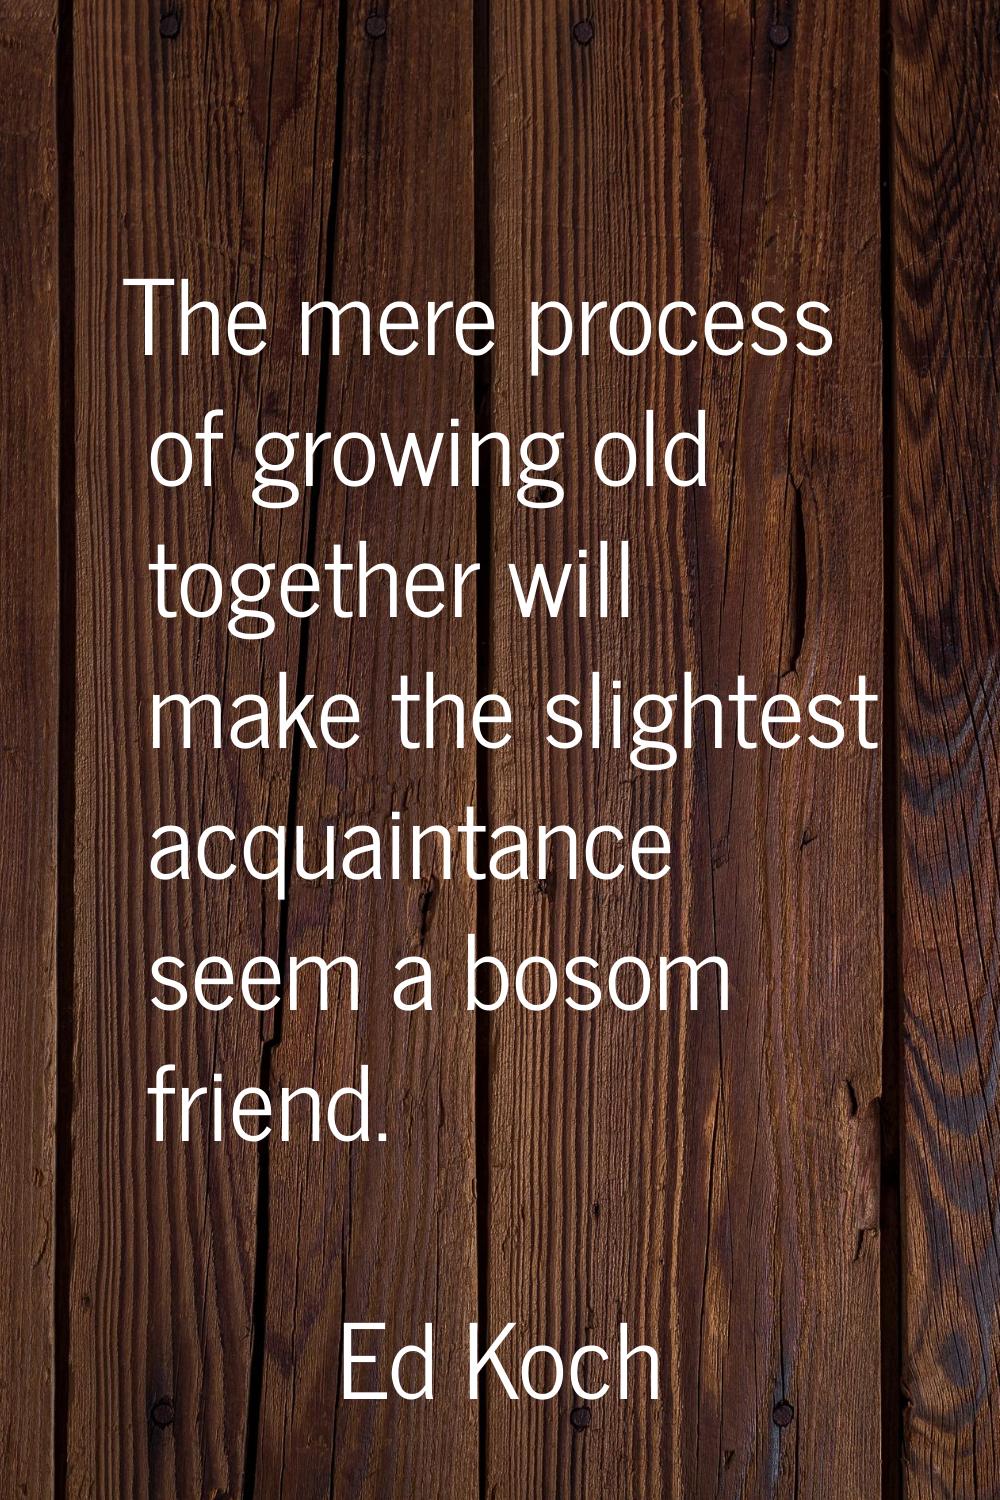 The mere process of growing old together will make the slightest acquaintance seem a bosom friend.